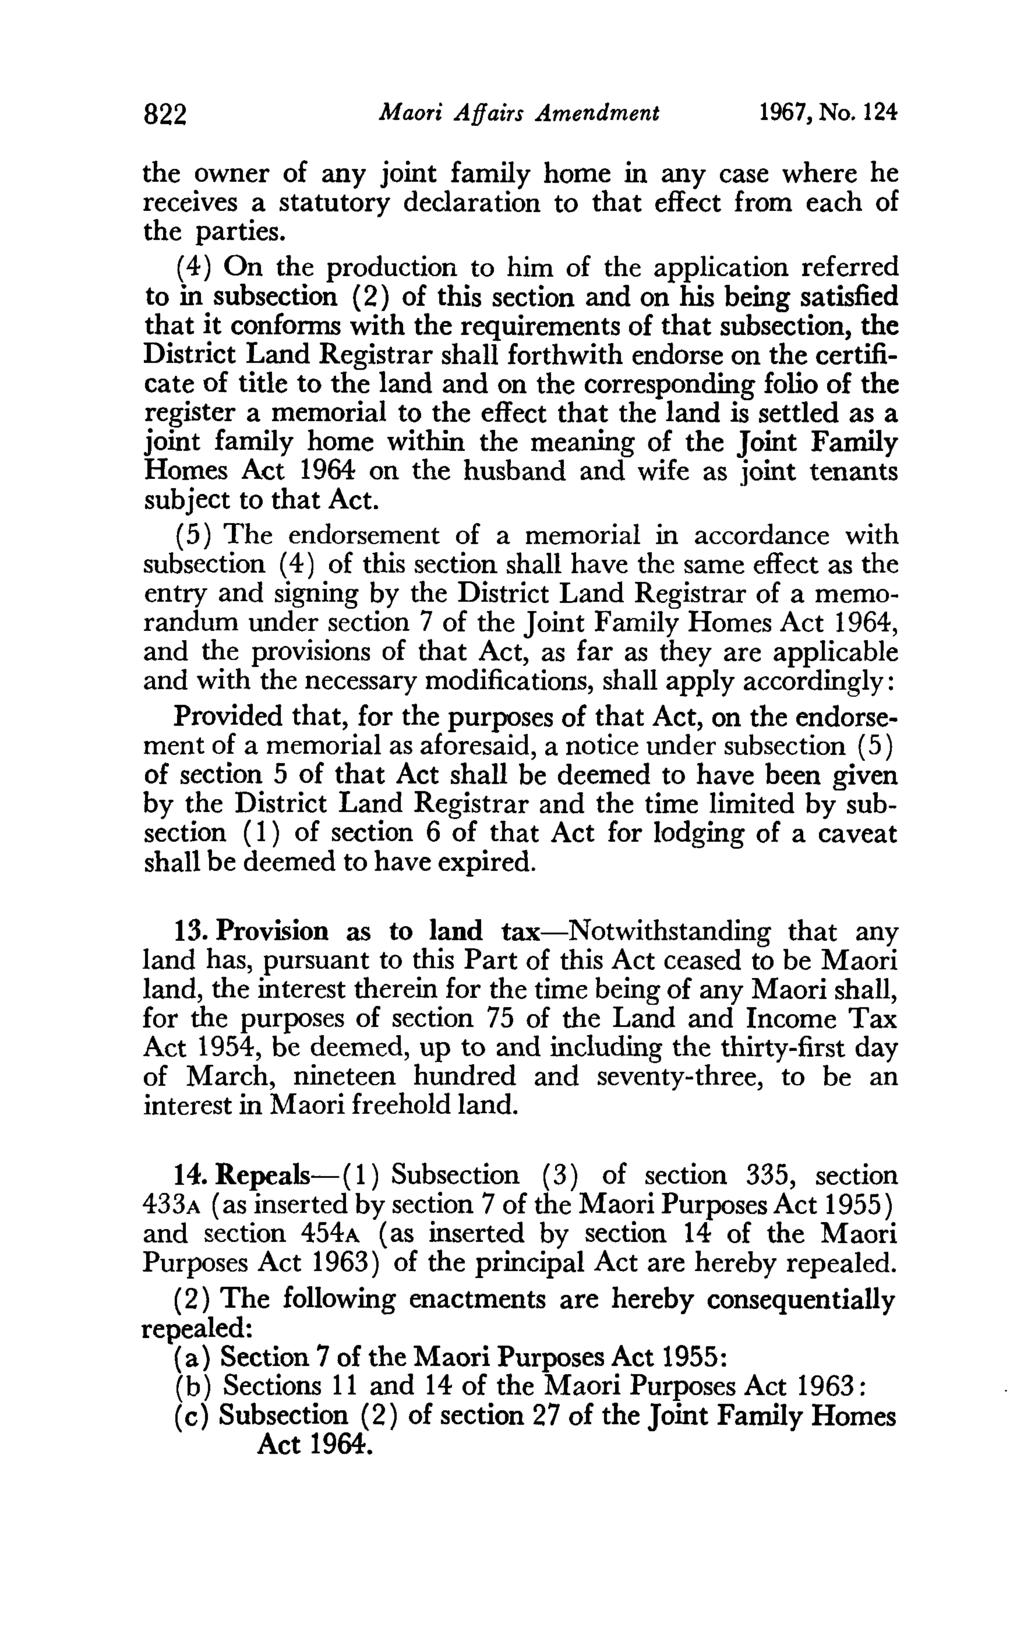 822 Maori Affairs Amendment 1967, No. 124 the owner of any joint family home in any case where he receives a statutory declaration to that effect from each of the parties.